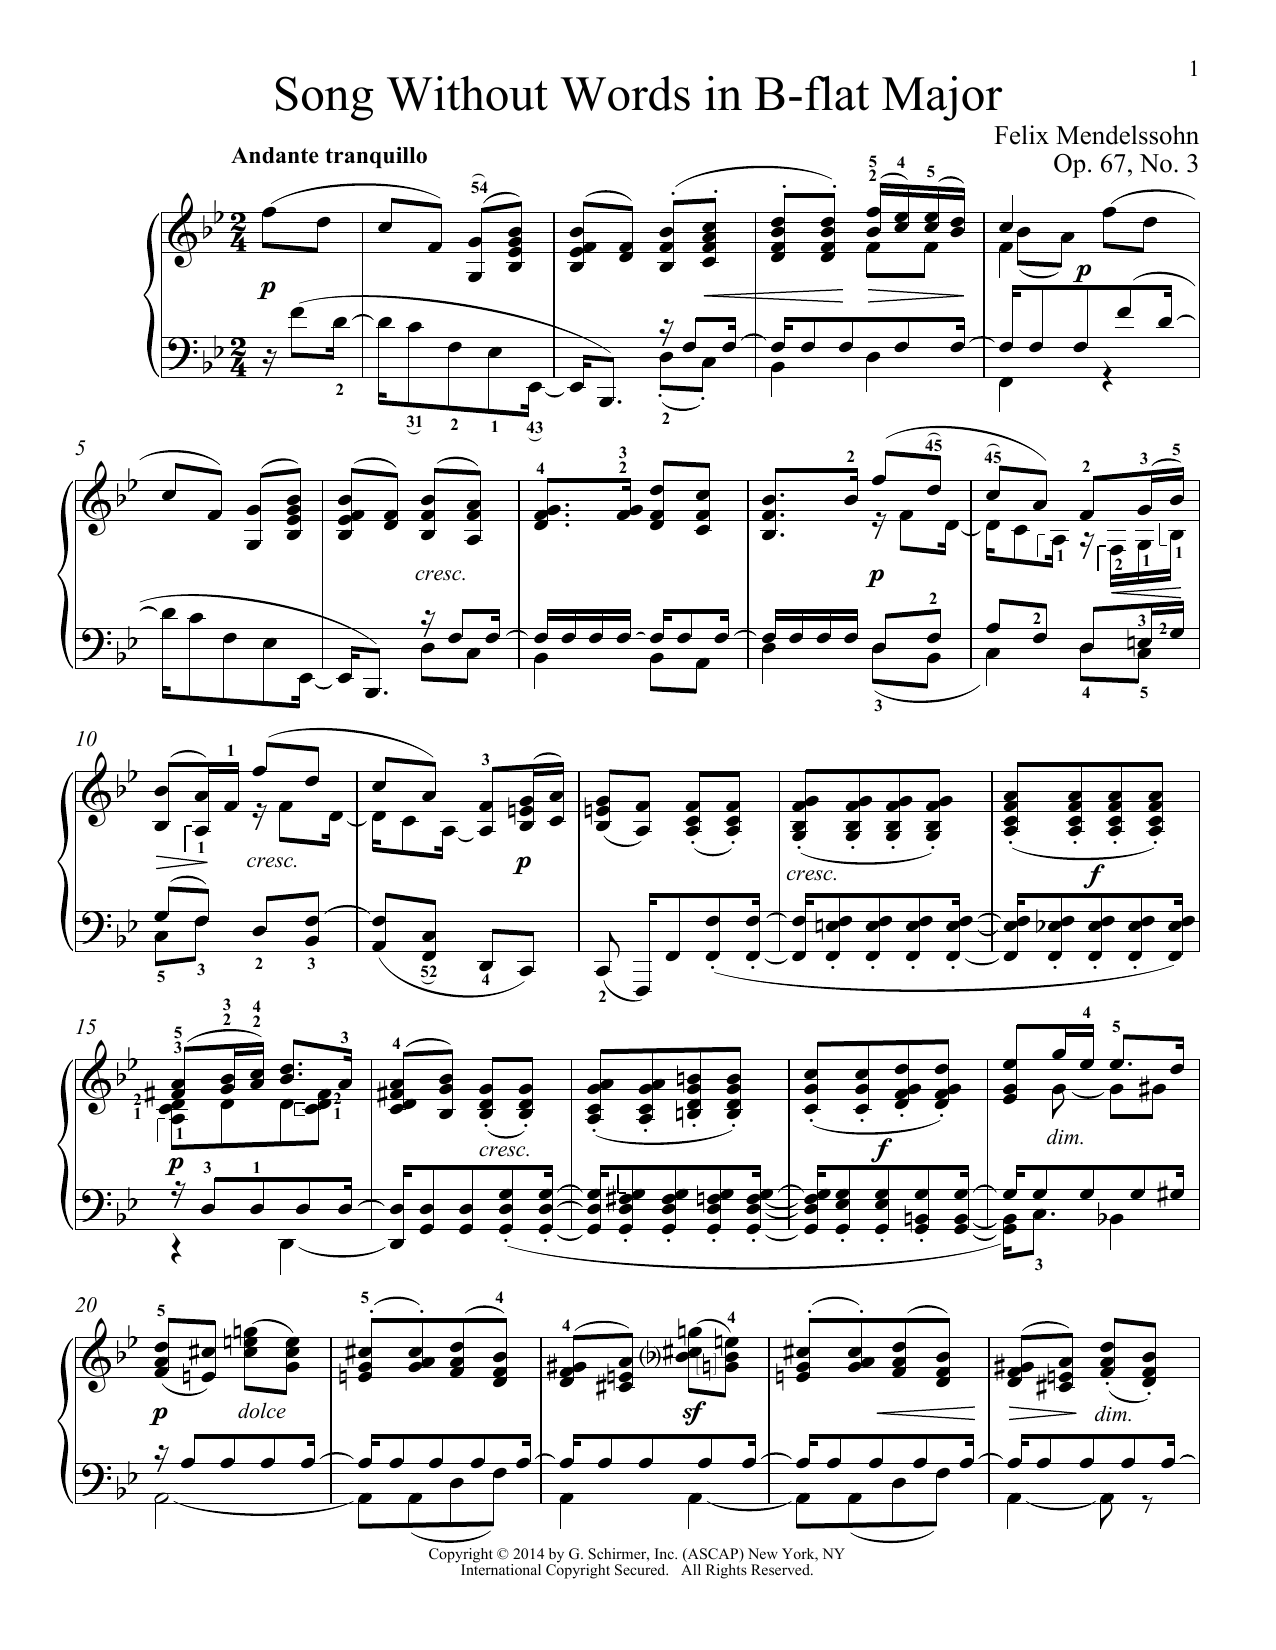 Immanuela Gruenberg Song Without Words In B Flat Major Op 67 No 3 Sheet Music Pdf Notes Chords Classical Score Piano Solo Download Printable Sku